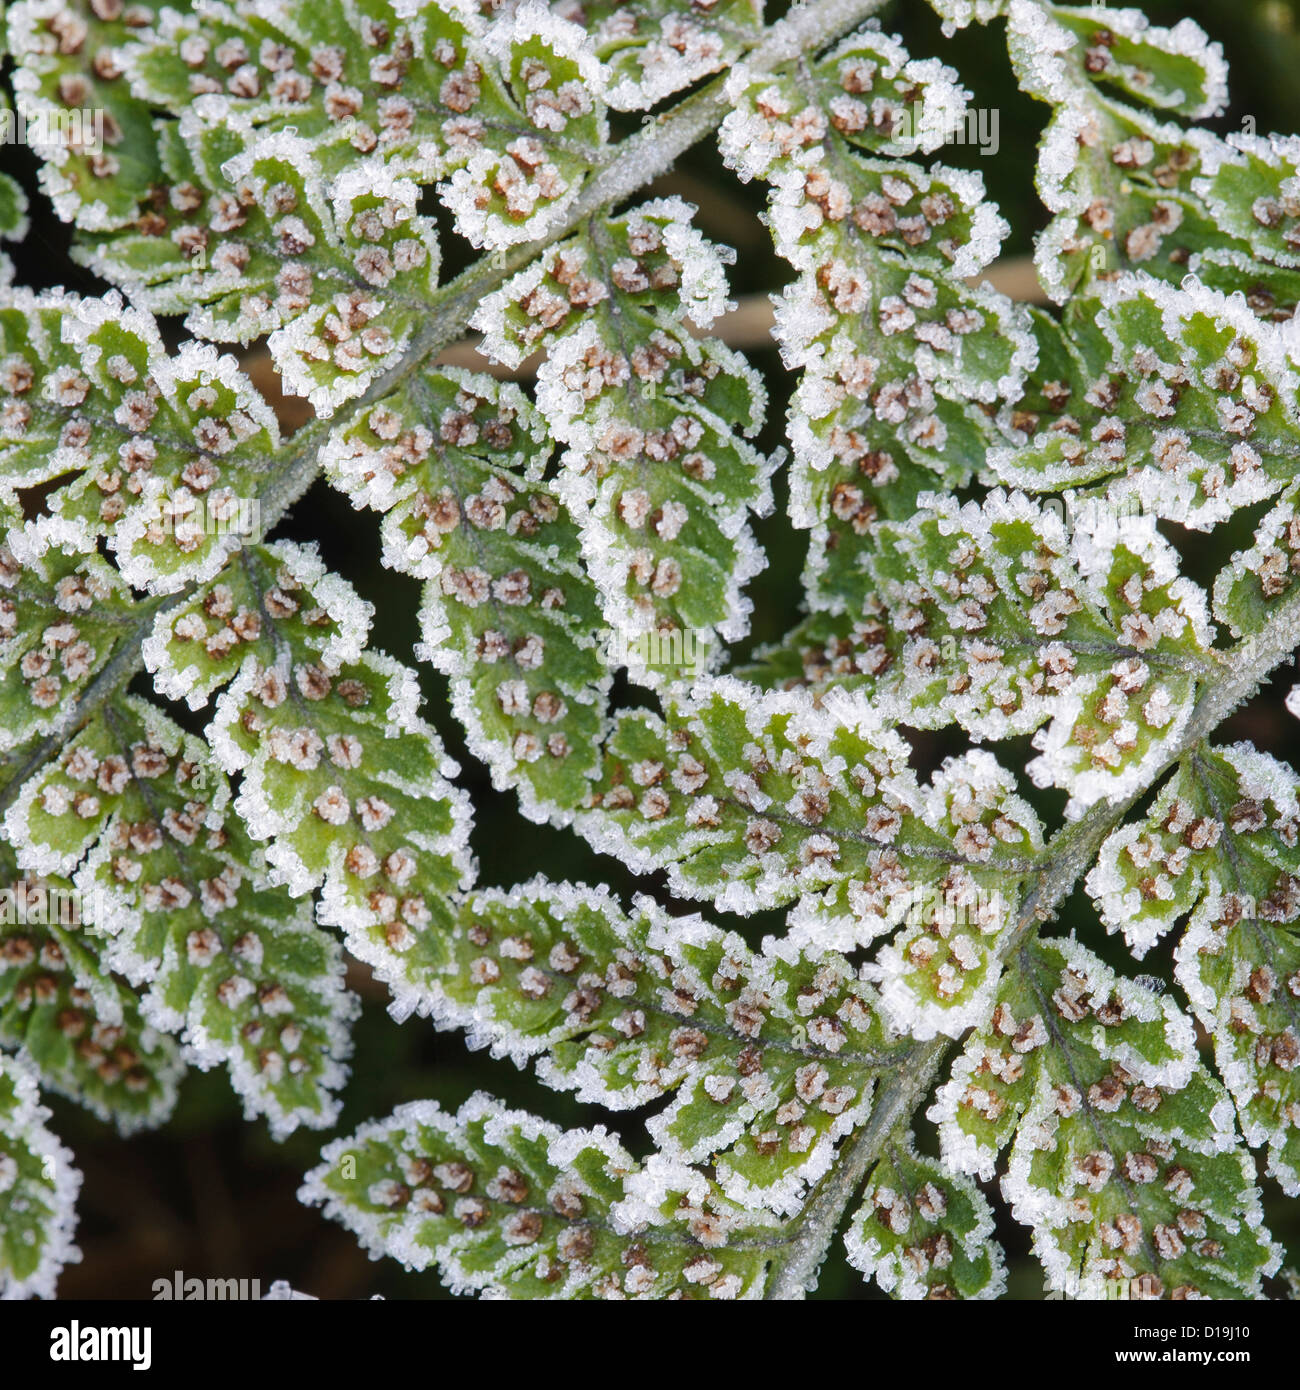 fern with hoarfrost Stock Photo